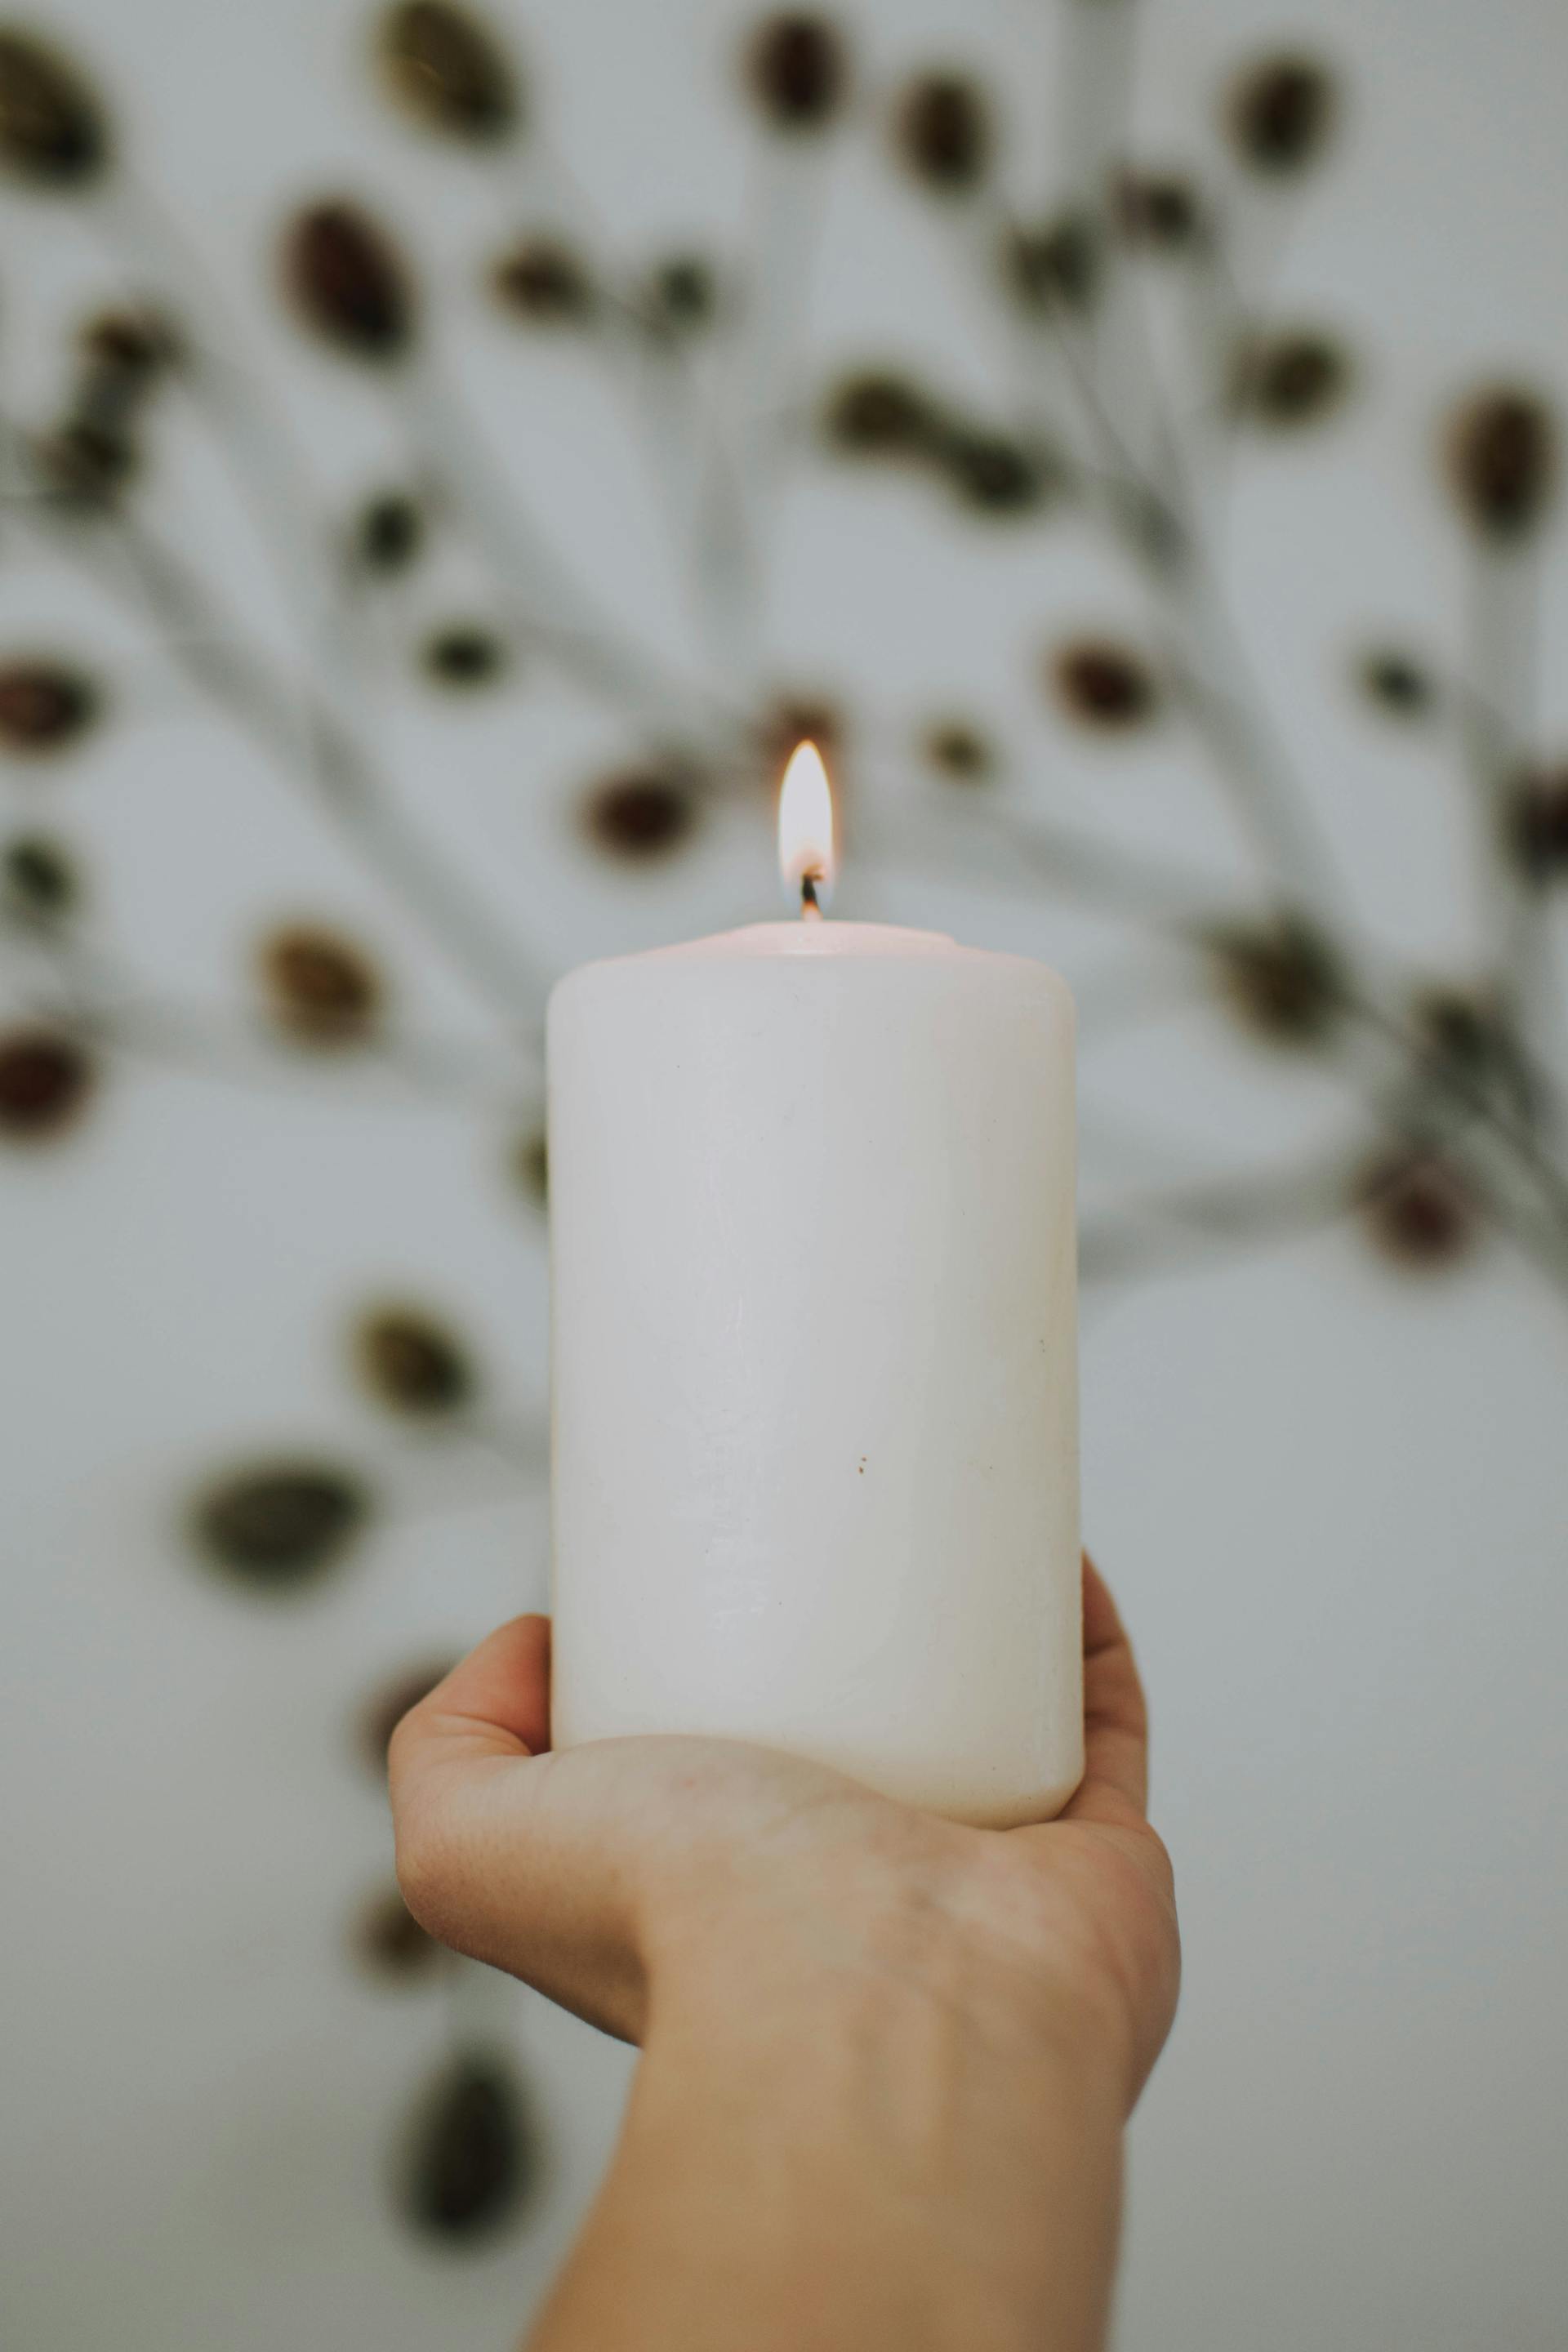 A person holding a lit candle | Source: Pexels